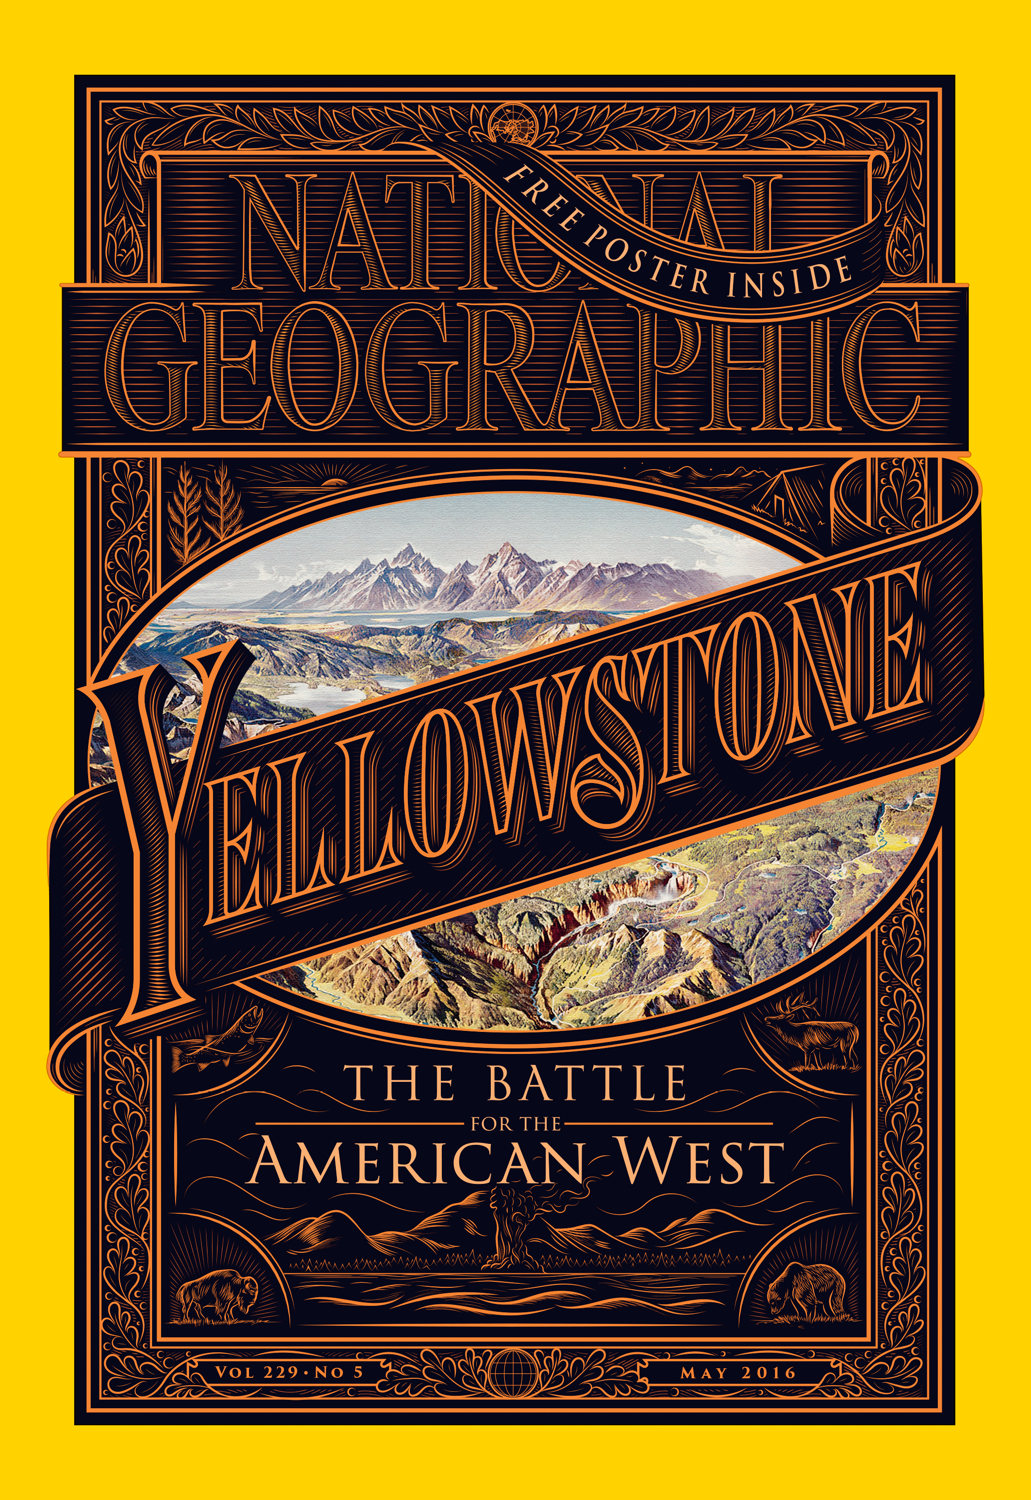 National Geographic - "Yellowstone: The Battle for the American West," May